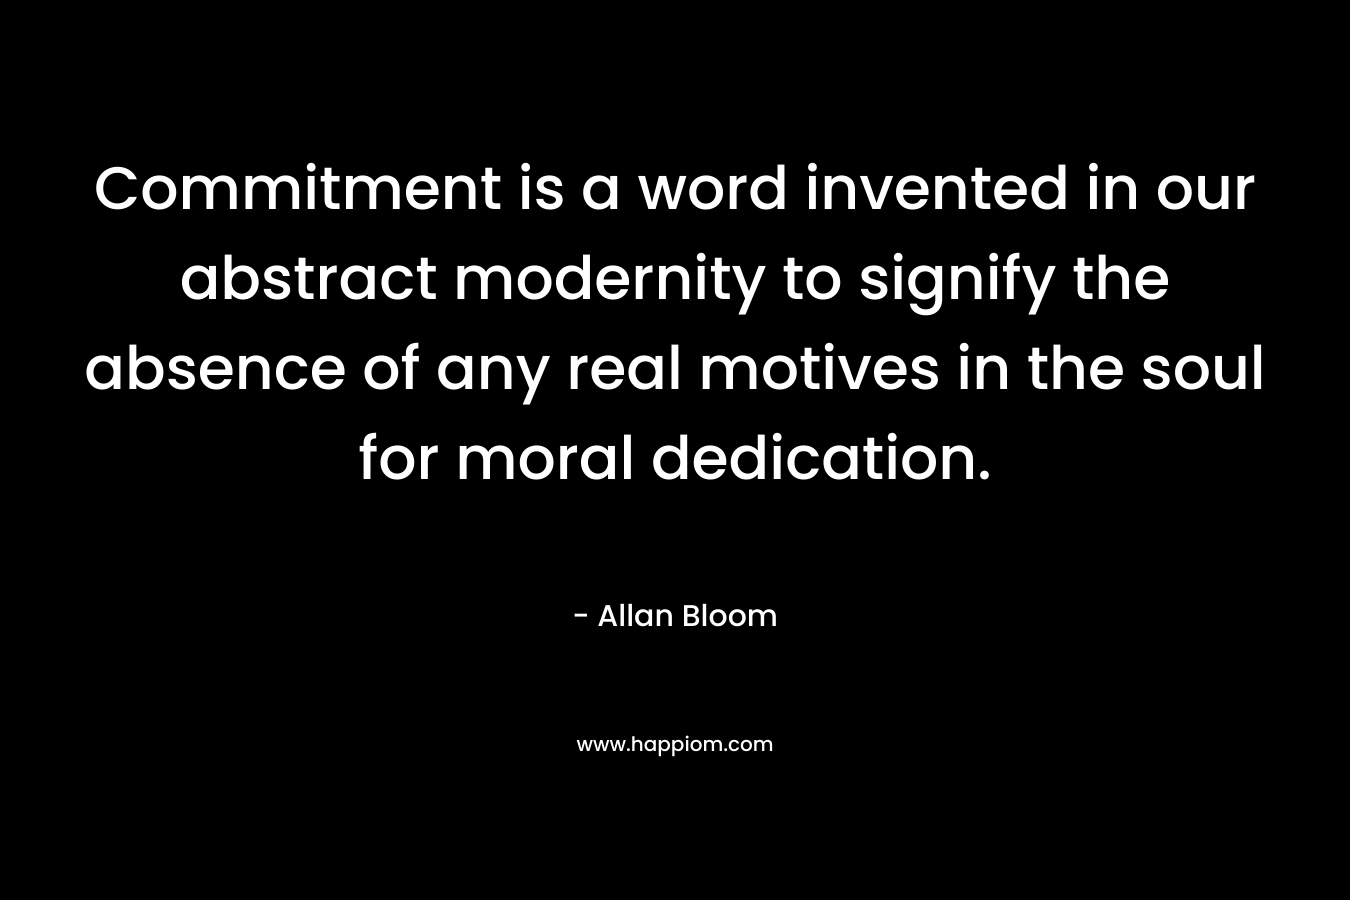 Commitment is a word invented in our abstract modernity to signify the absence of any real motives in the soul for moral dedication. – Allan Bloom